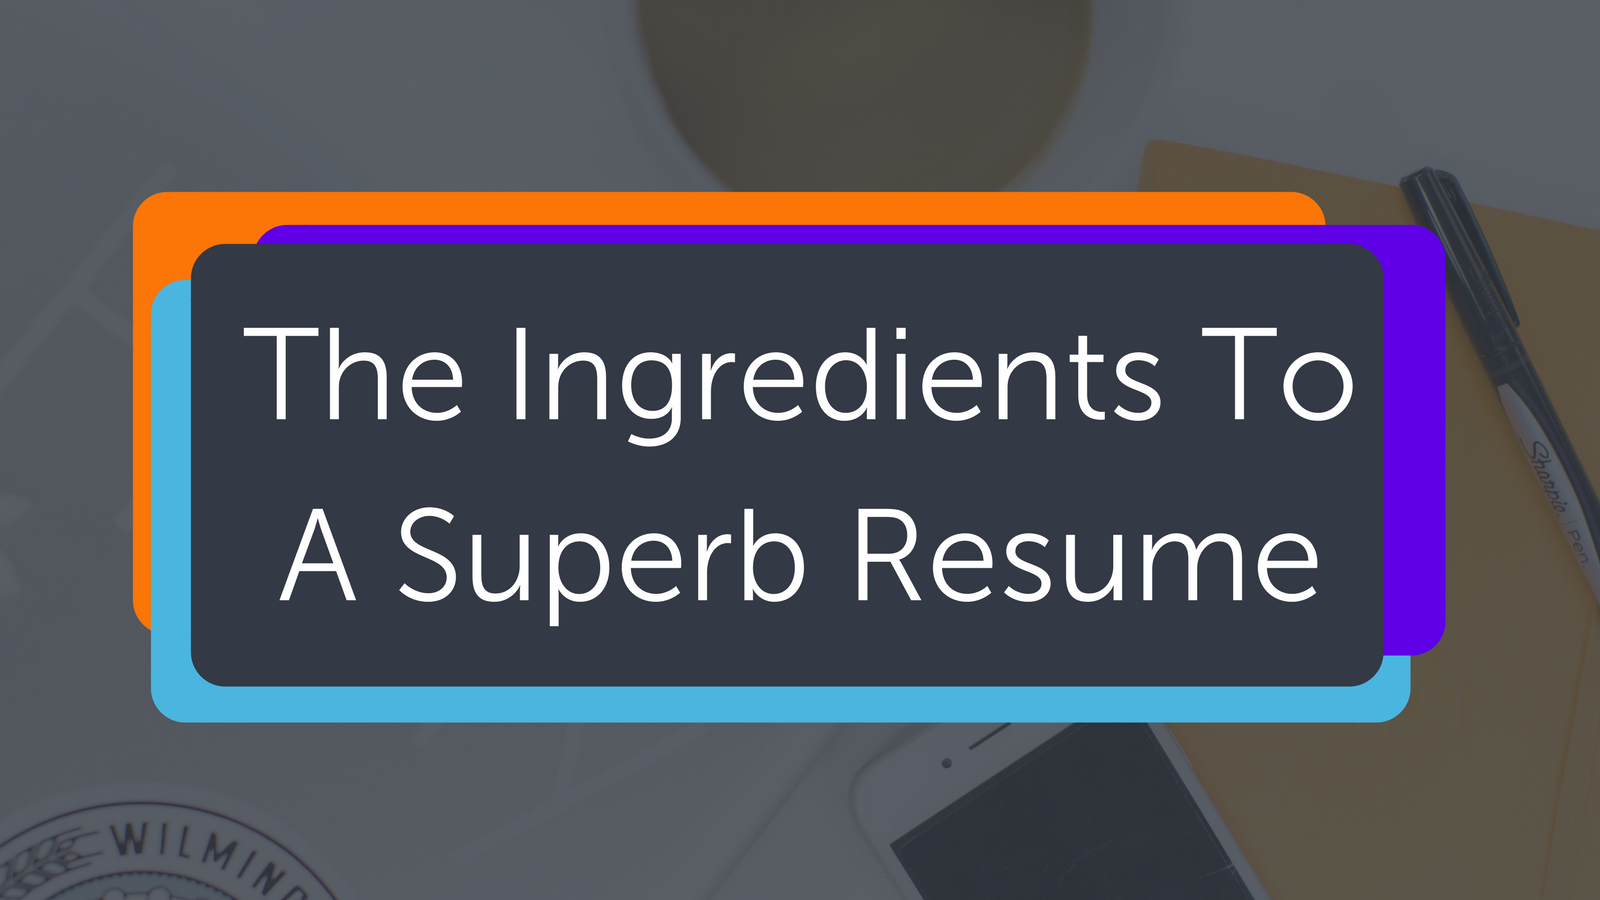 The Ingredients to a Superb Resume